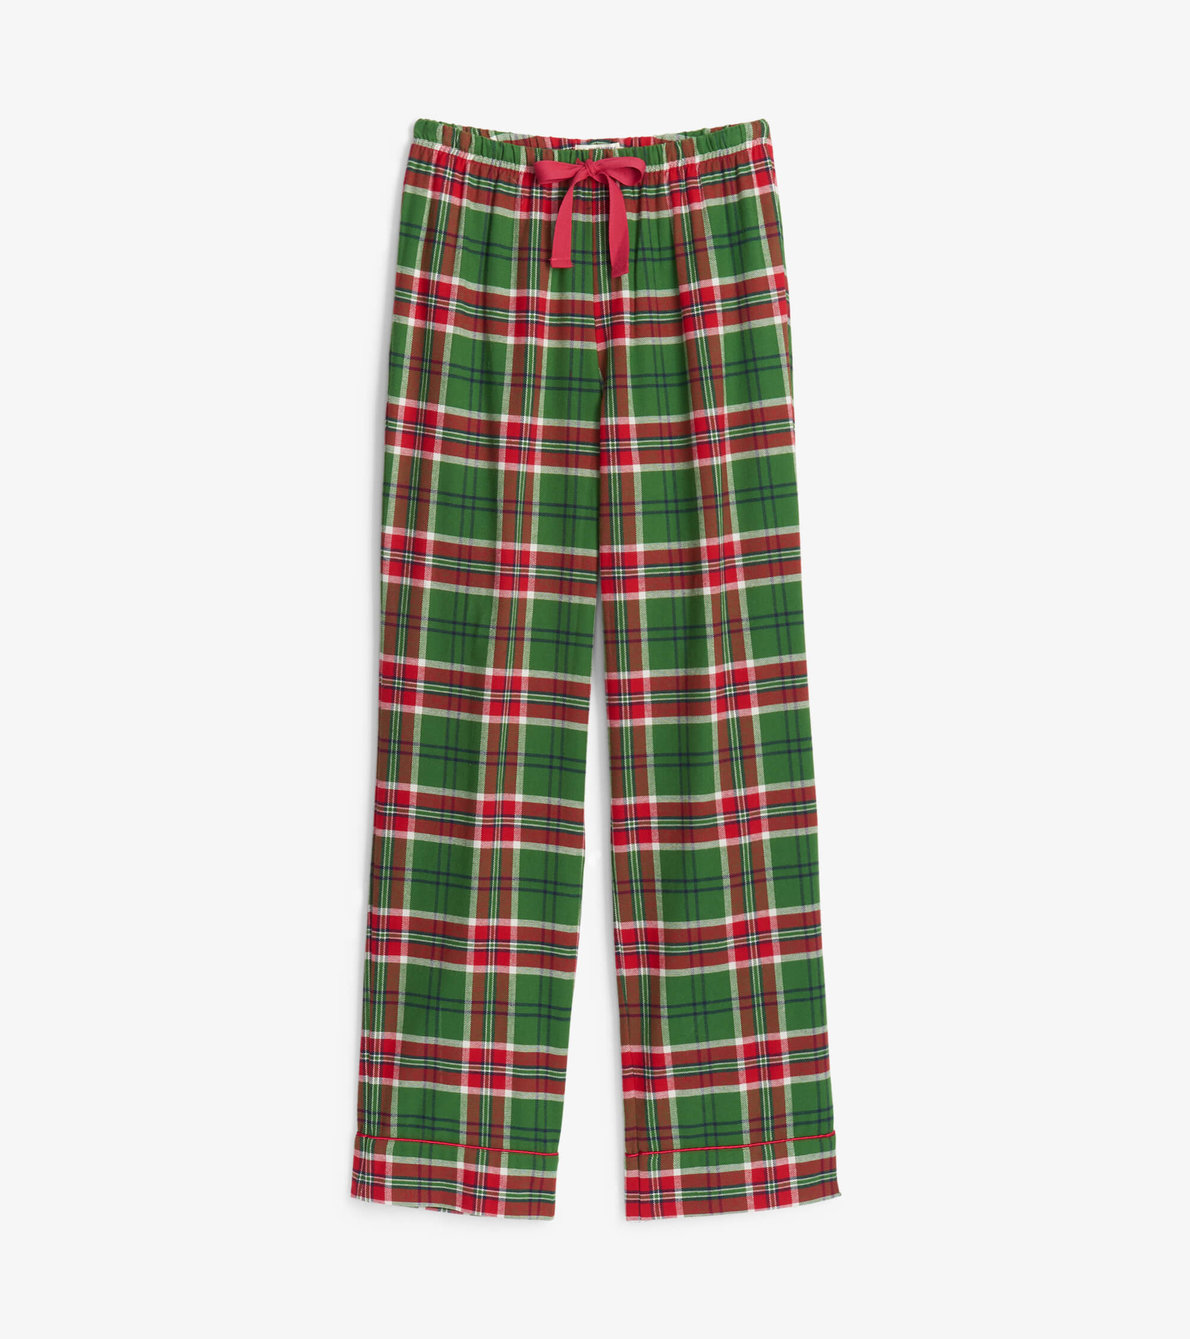 View larger image of Women's Country Christmas Plaid Flannel Pajama Set